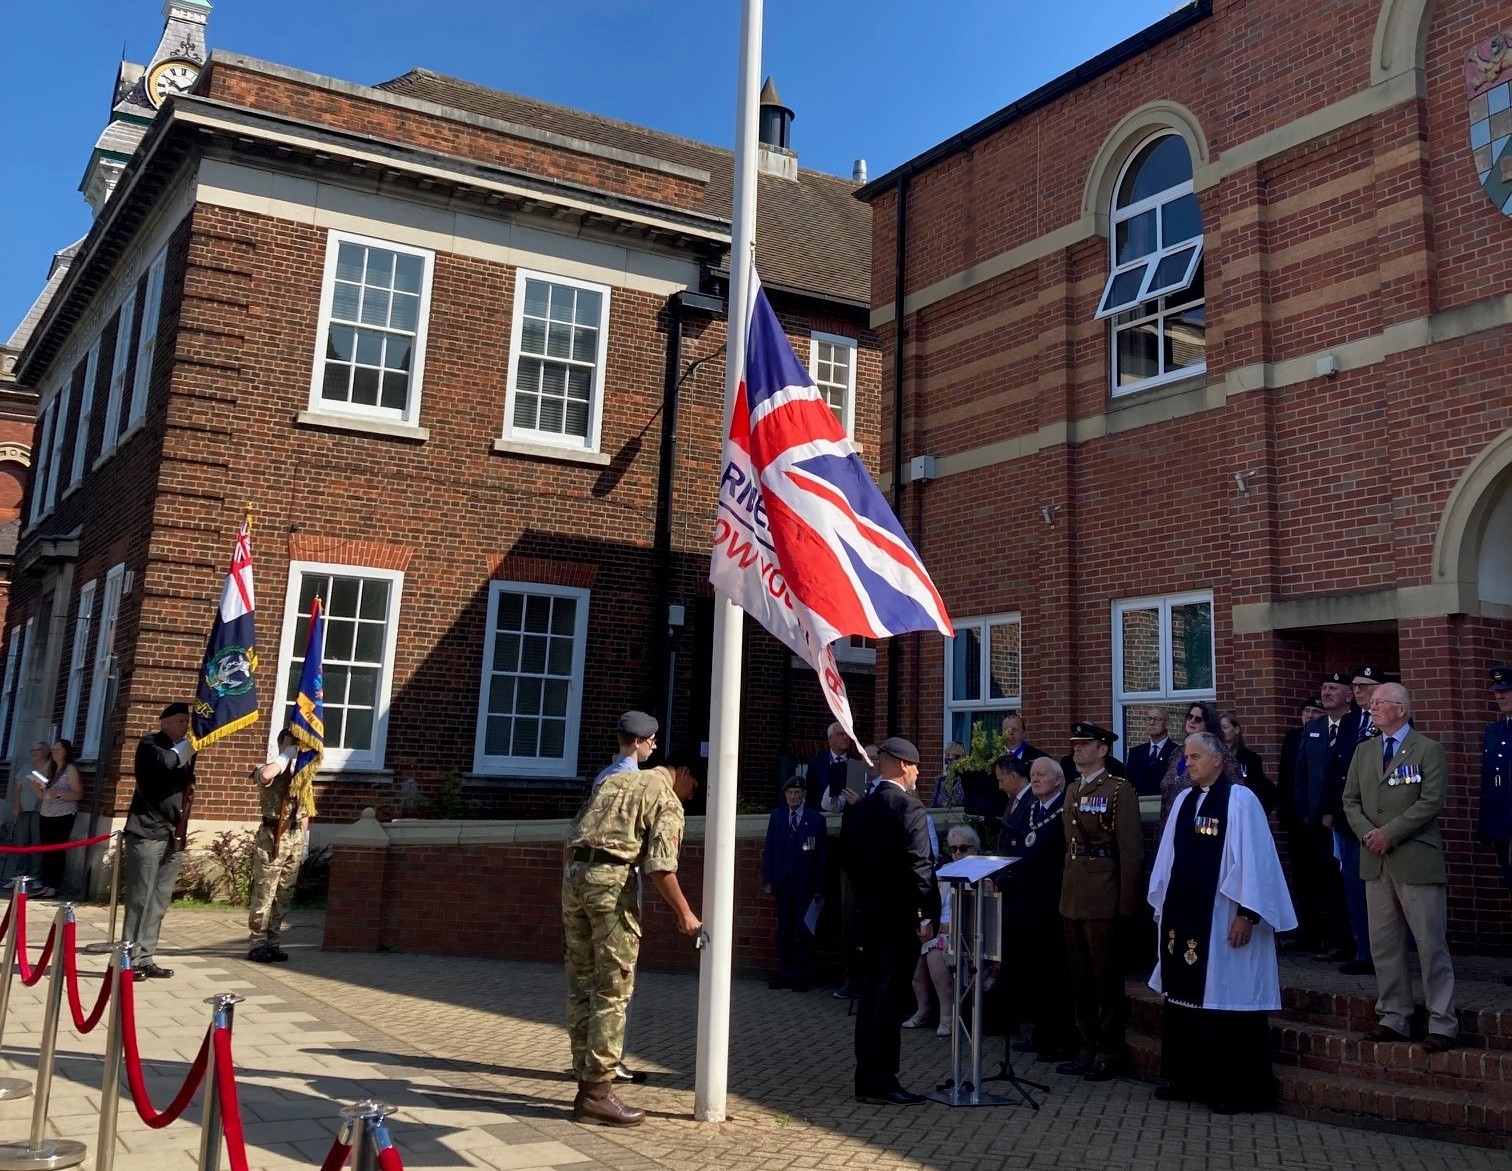 Cadet Corporal Arun Ratcliffe raised the Armed Forces flag